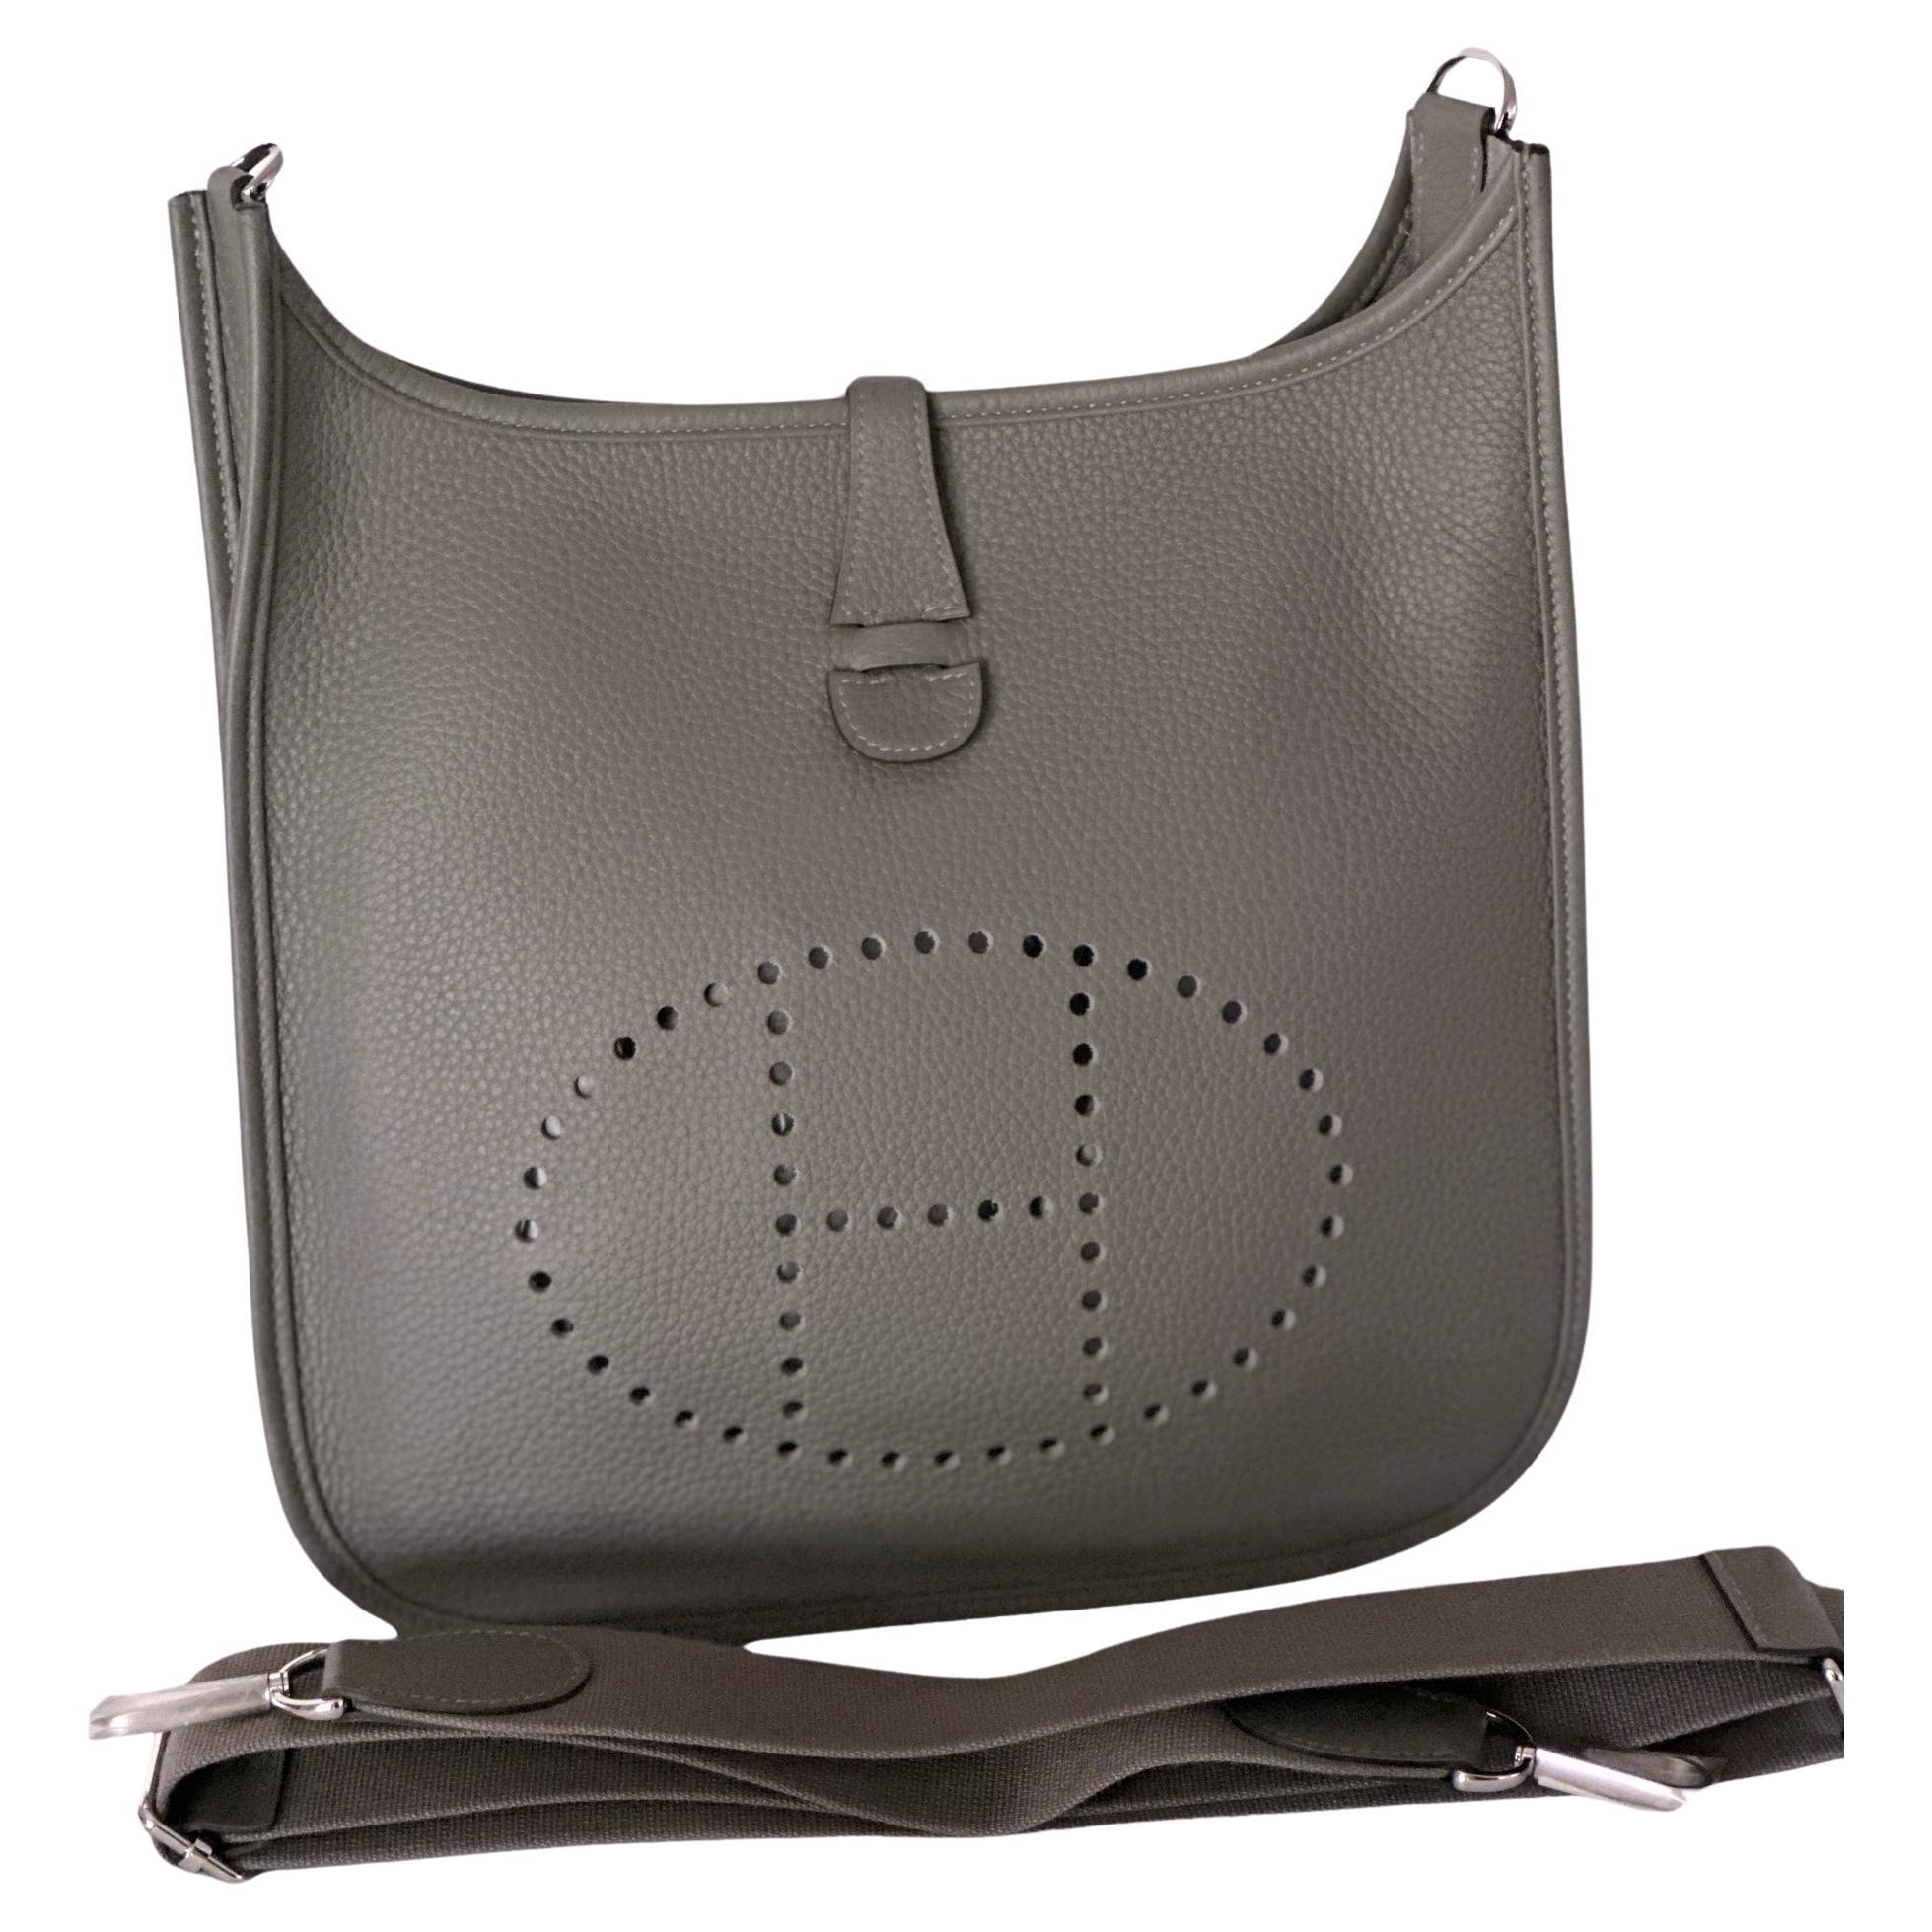 HERMÈS Kelly Touch 25 handbag in Black Togo leather and Lizard